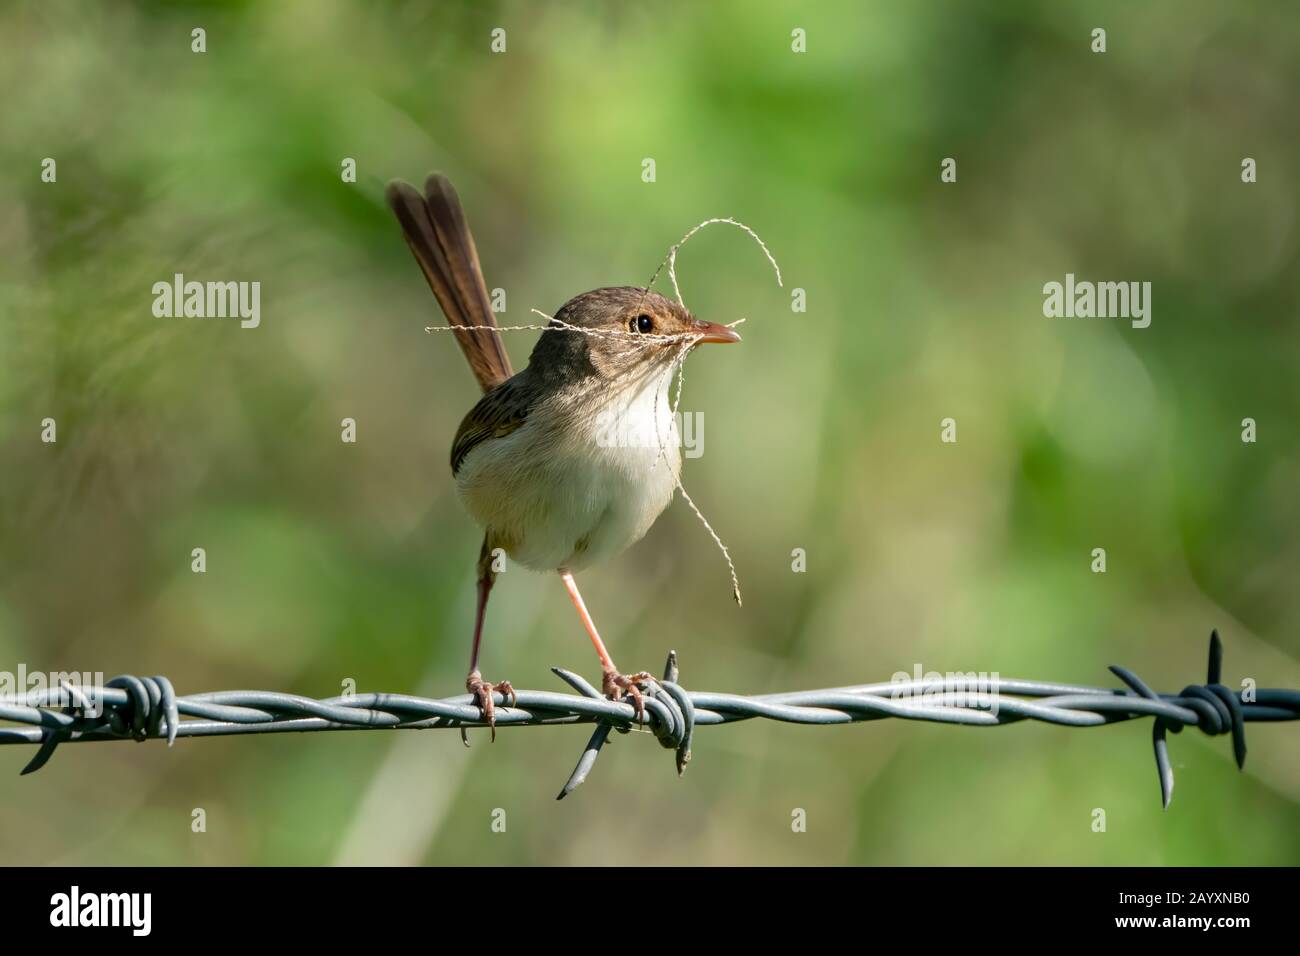 red-backed fairy-wren, Malurus melanocephalus, female carrying nesting material, perched on barbed wire fence, Cairns, Australia 4 January 2020 Stock Photo